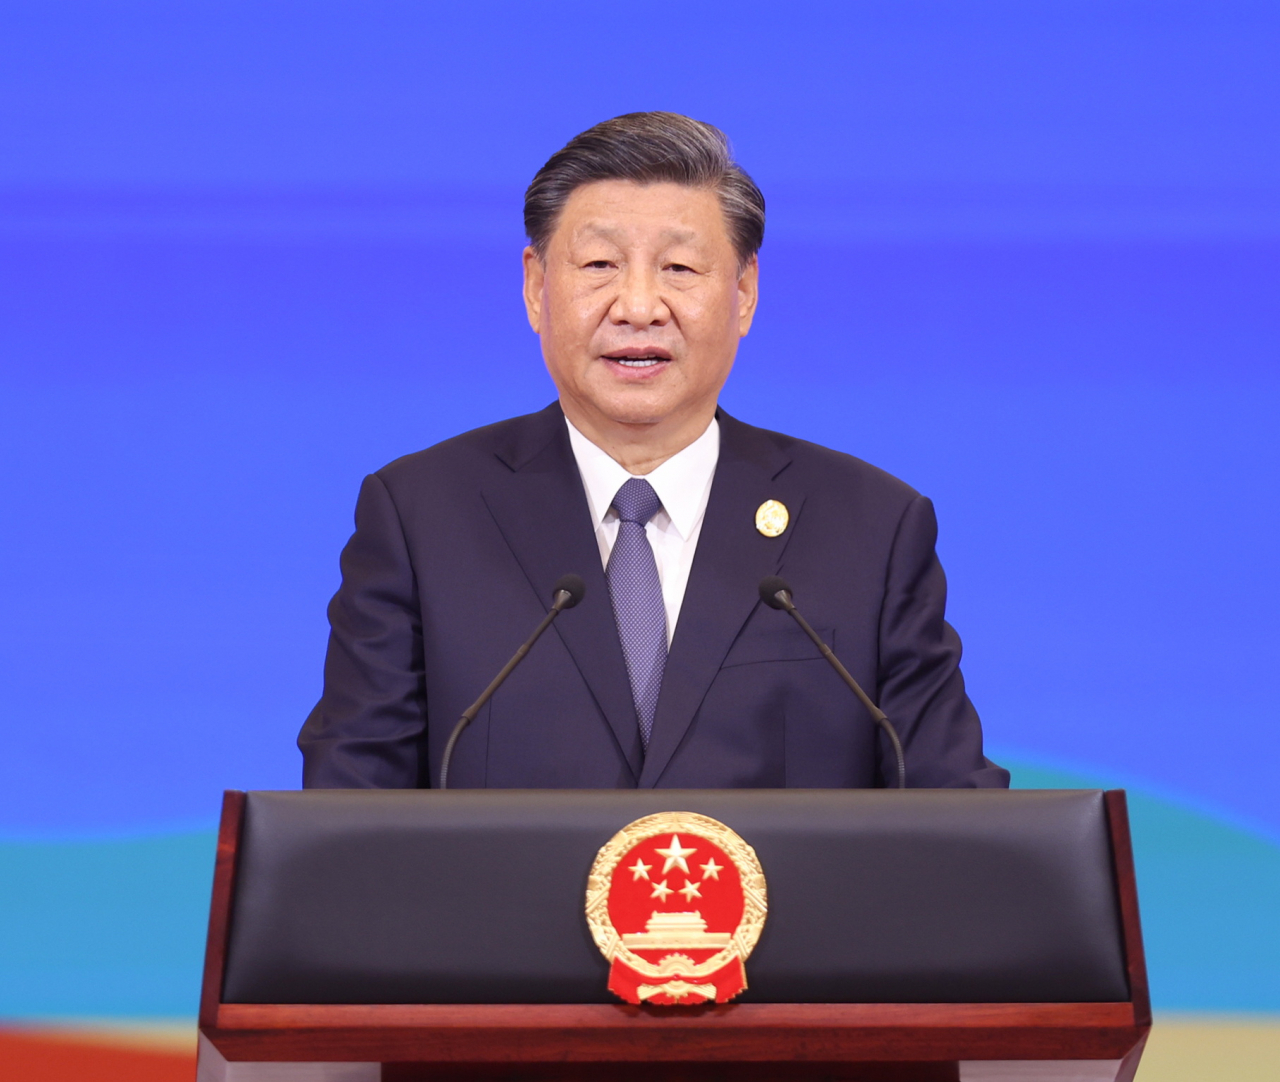 Chinese President Xi Jinping attends the opening ceremony of the third Belt and Road Forum for International Cooperation and delivers a keynote speech at the Great Hall of the People in Beijing on Tuesday. (Xinhua-Yonhap)